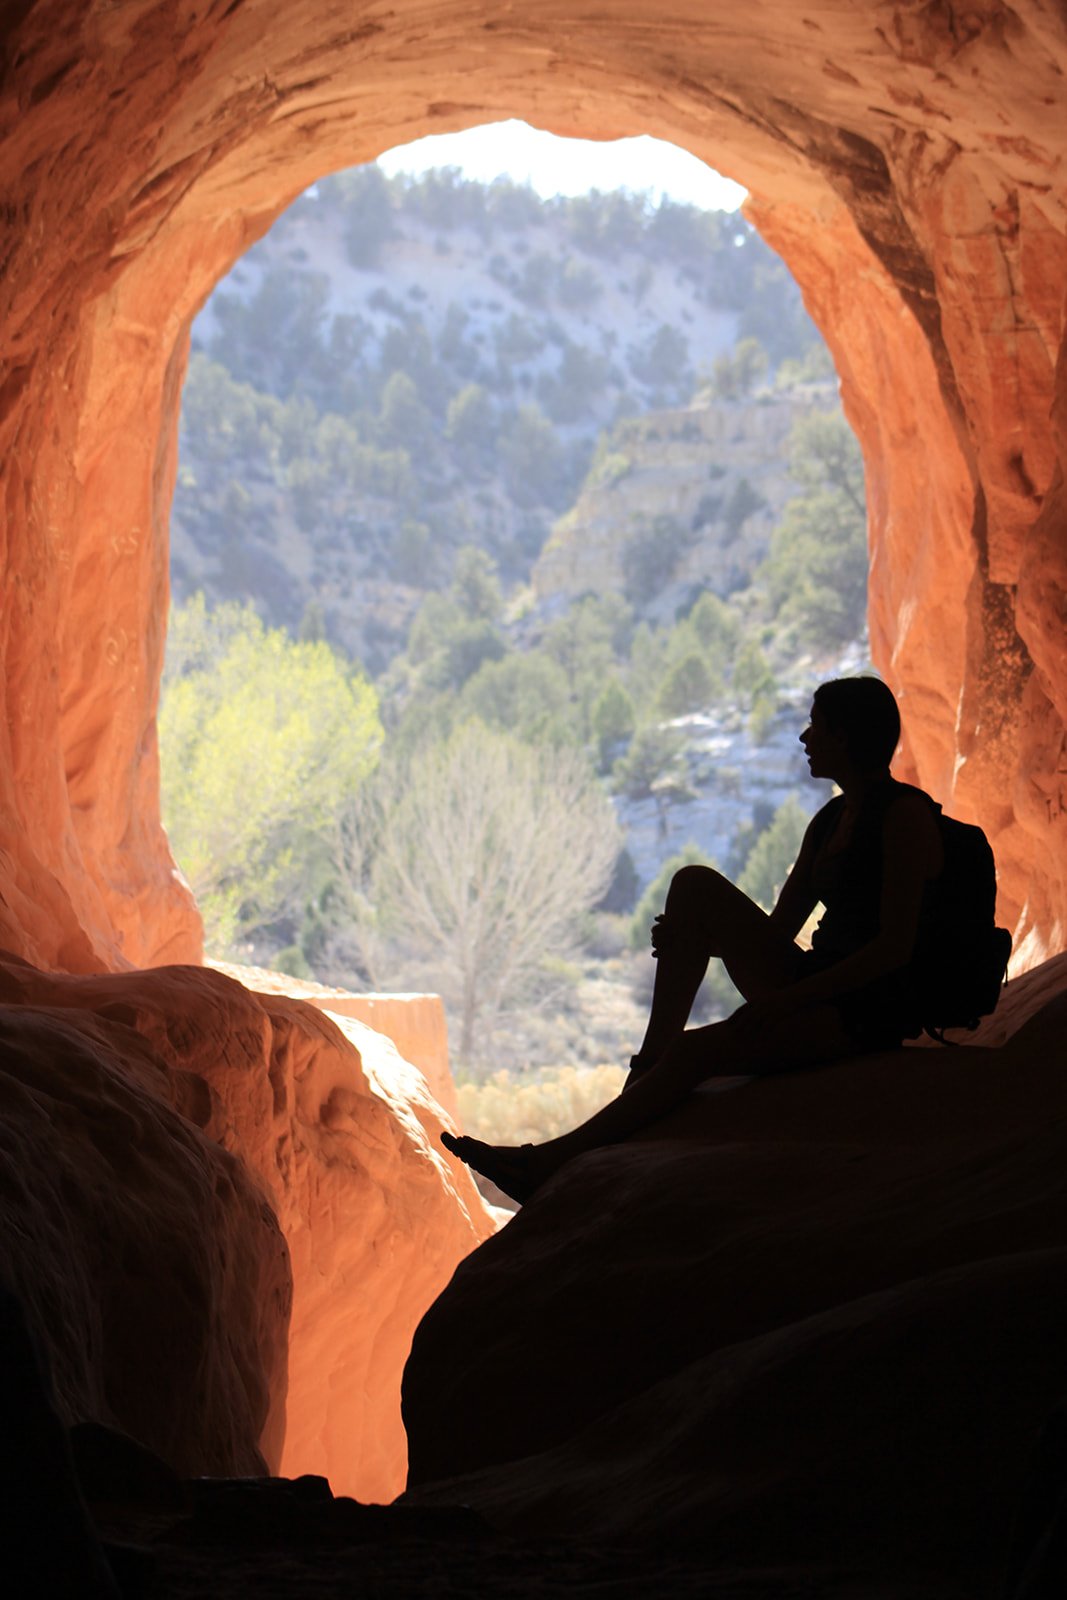 A silhouette of a woman sits in a tunnel made of red rocks overlooking a view.